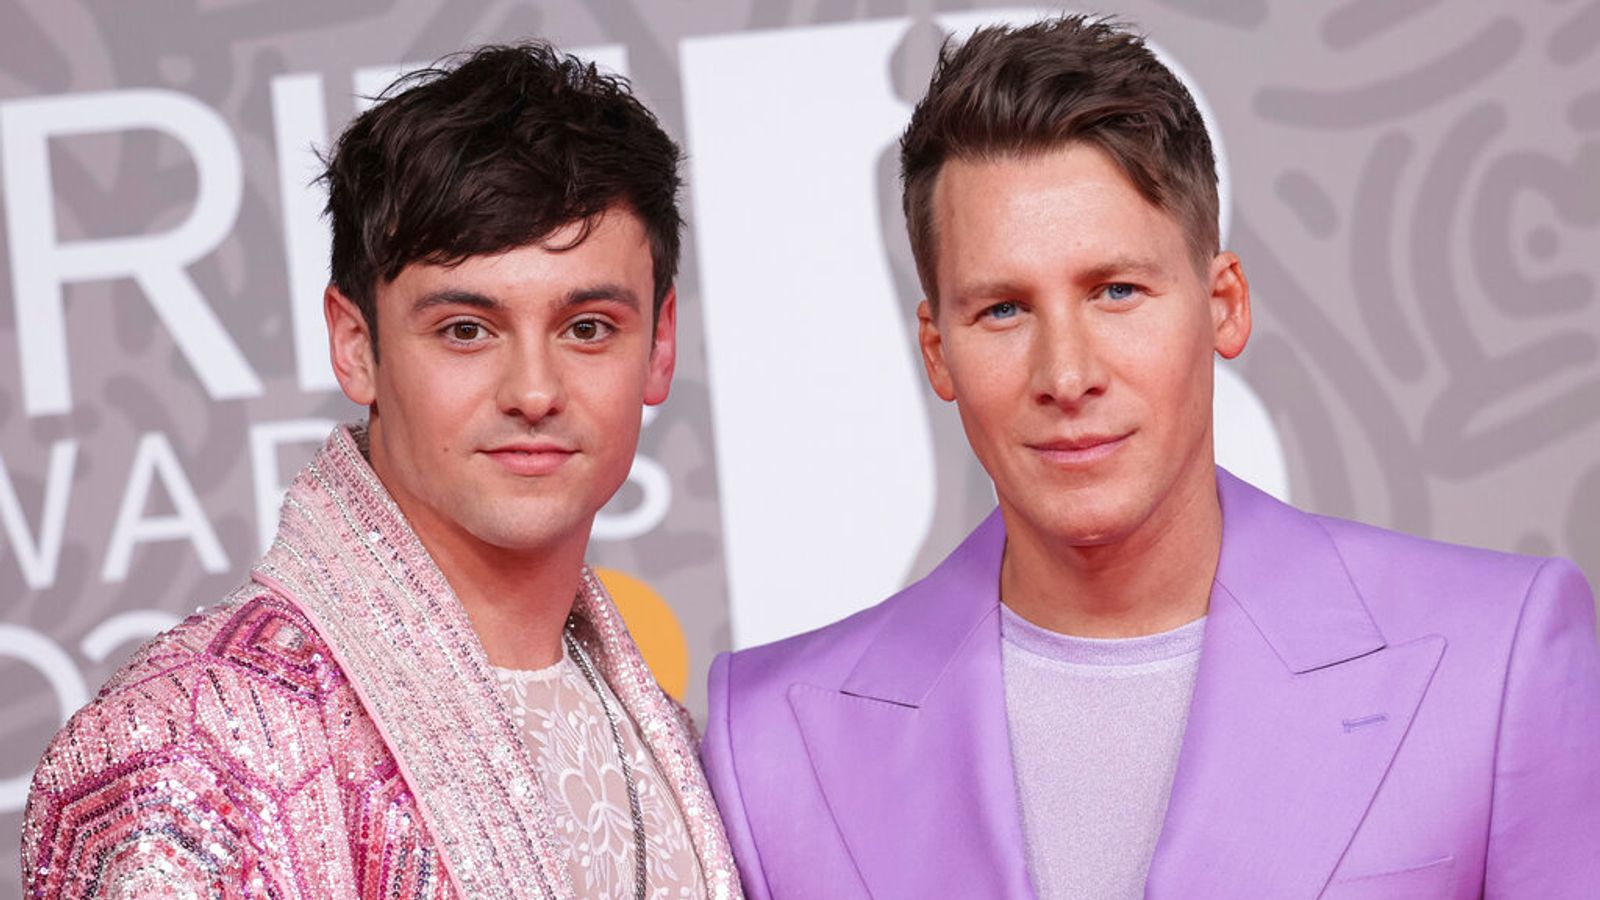 Tom Daley's husband Dustin Lance Black accused of assaulting woman in nightclub